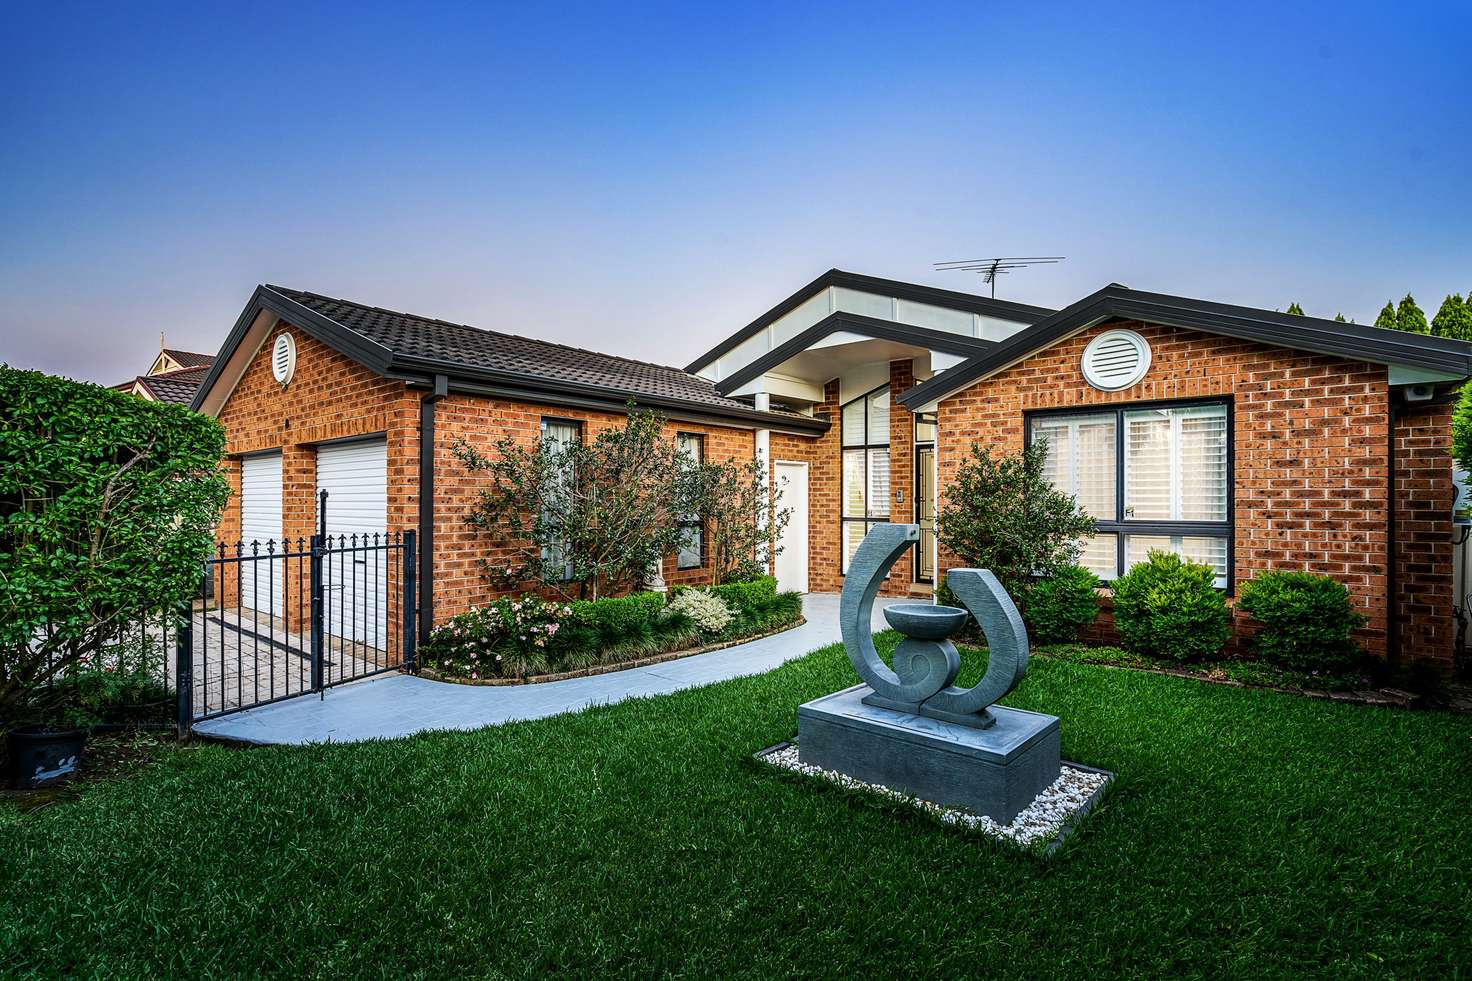 Main view of Homely house listing, 8 Persimmon Way, Glenwood NSW 2768